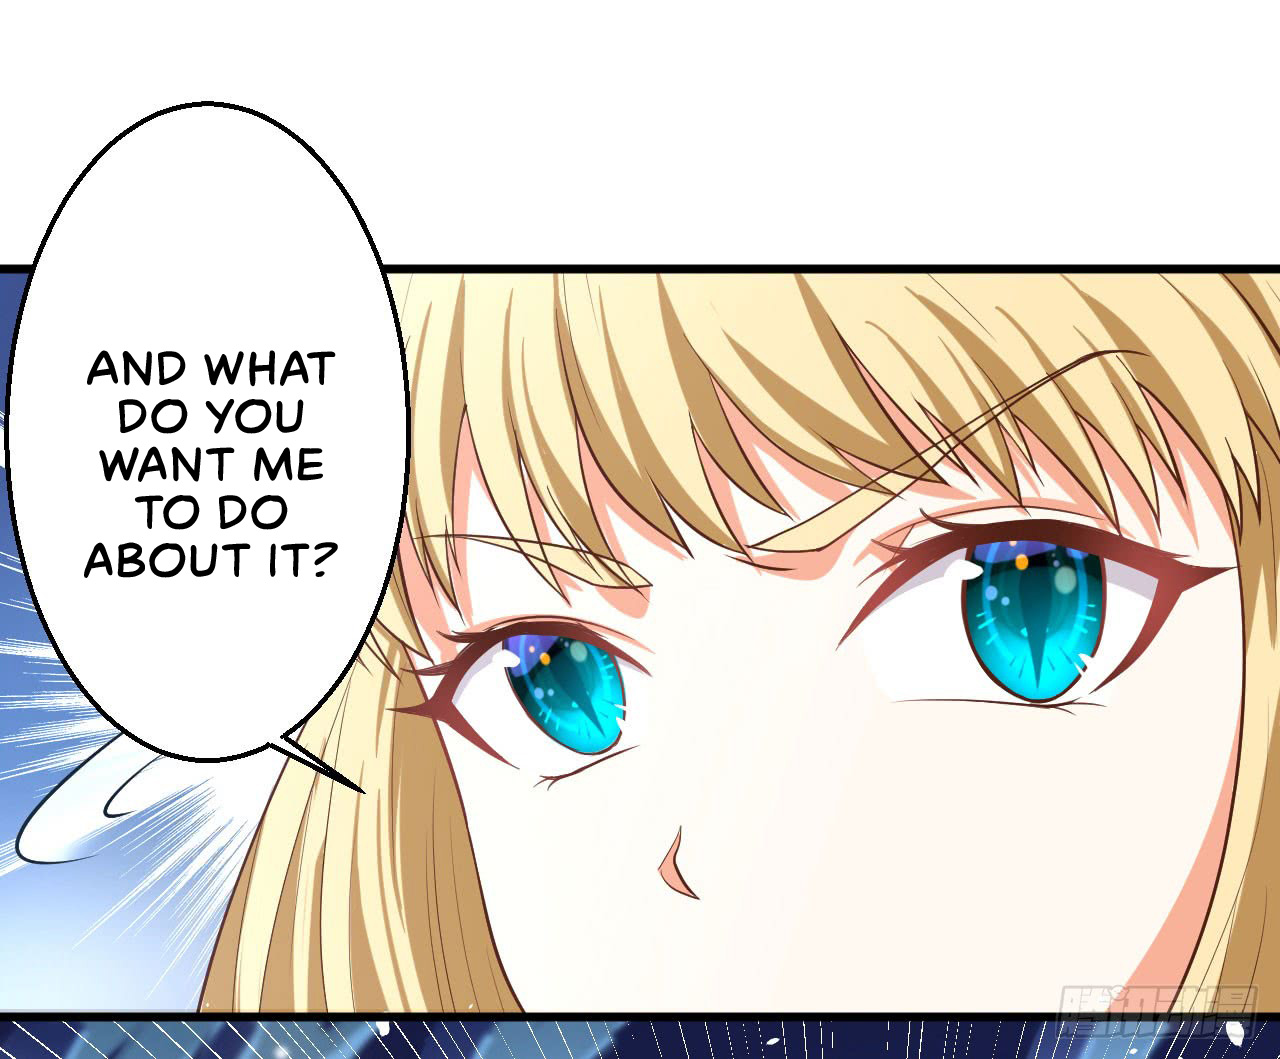 Starting From Today I'll Work As A City Lord Ch. 15 Big Sis, Let's Go Save 2nd Big Sister!